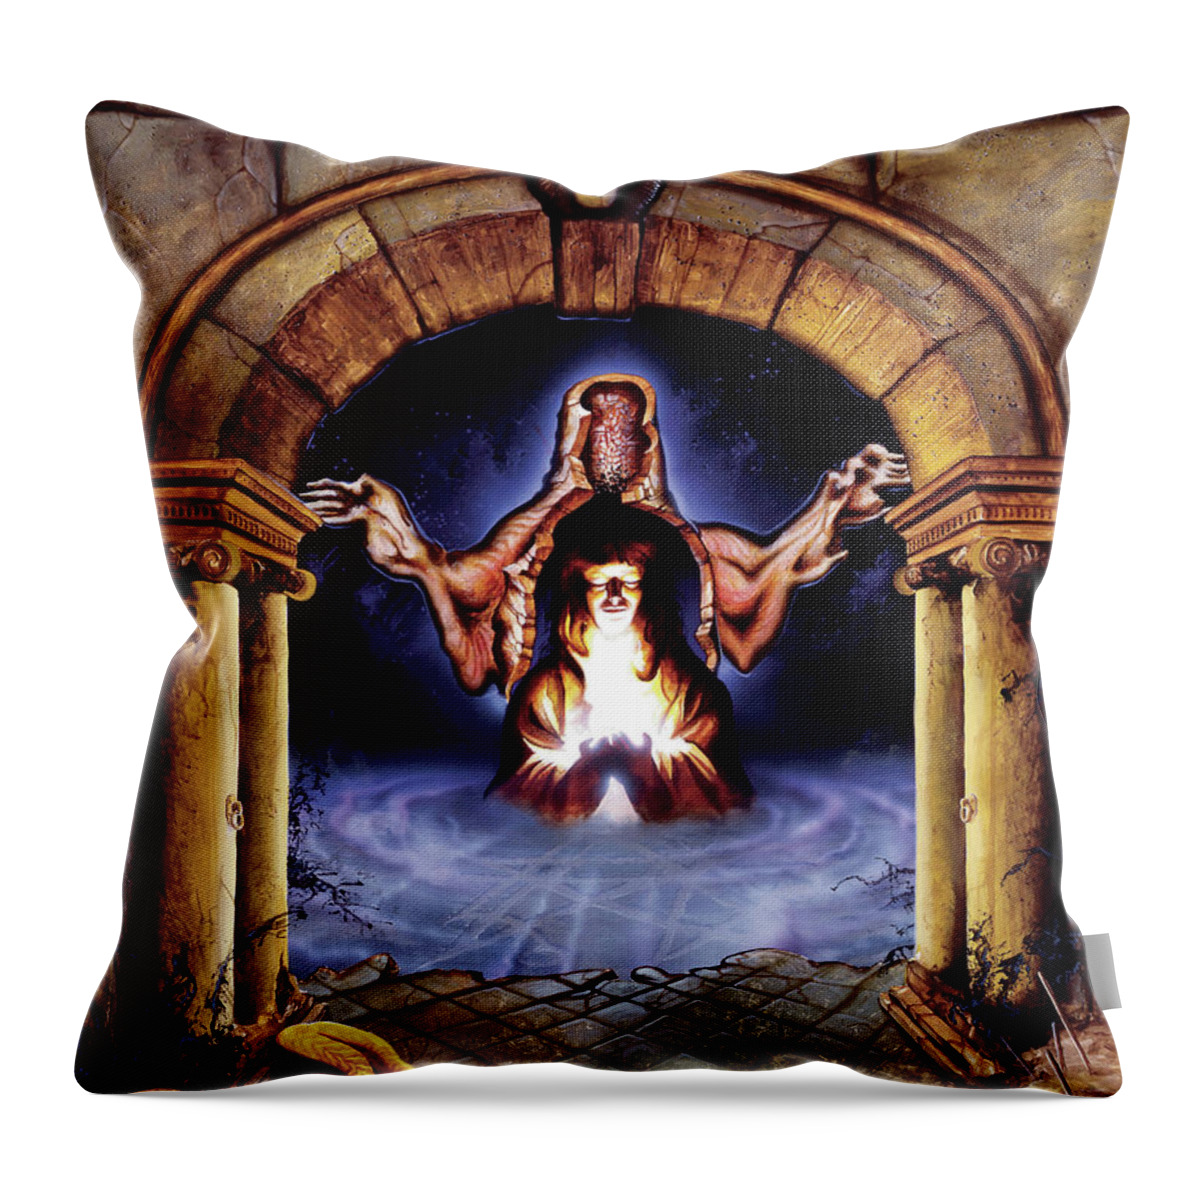 Gothic Throw Pillow featuring the painting The Welcome by Sv Bell